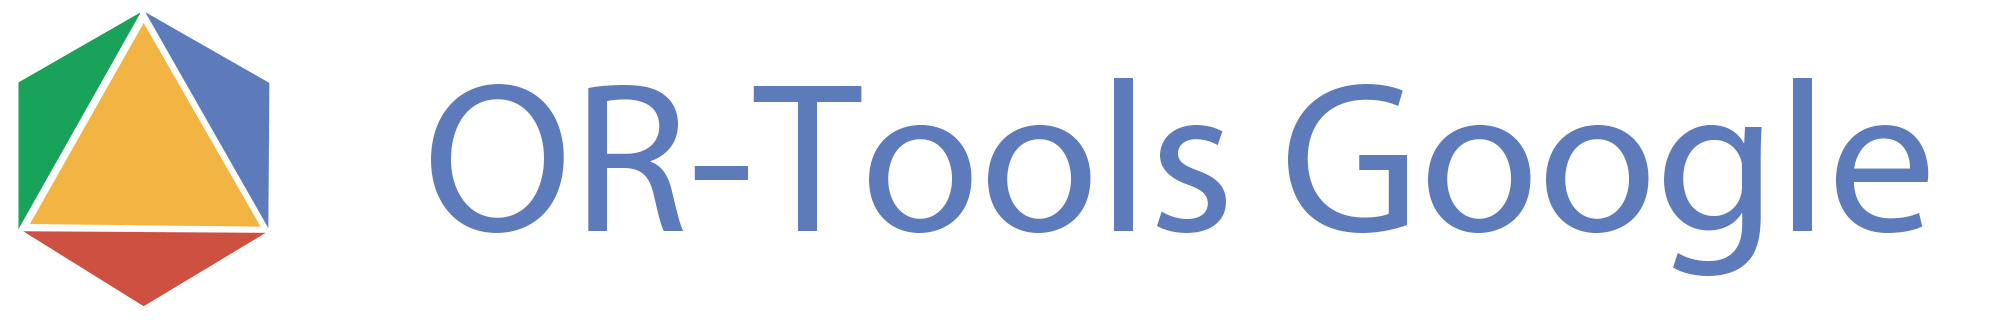 OR-Tools Google